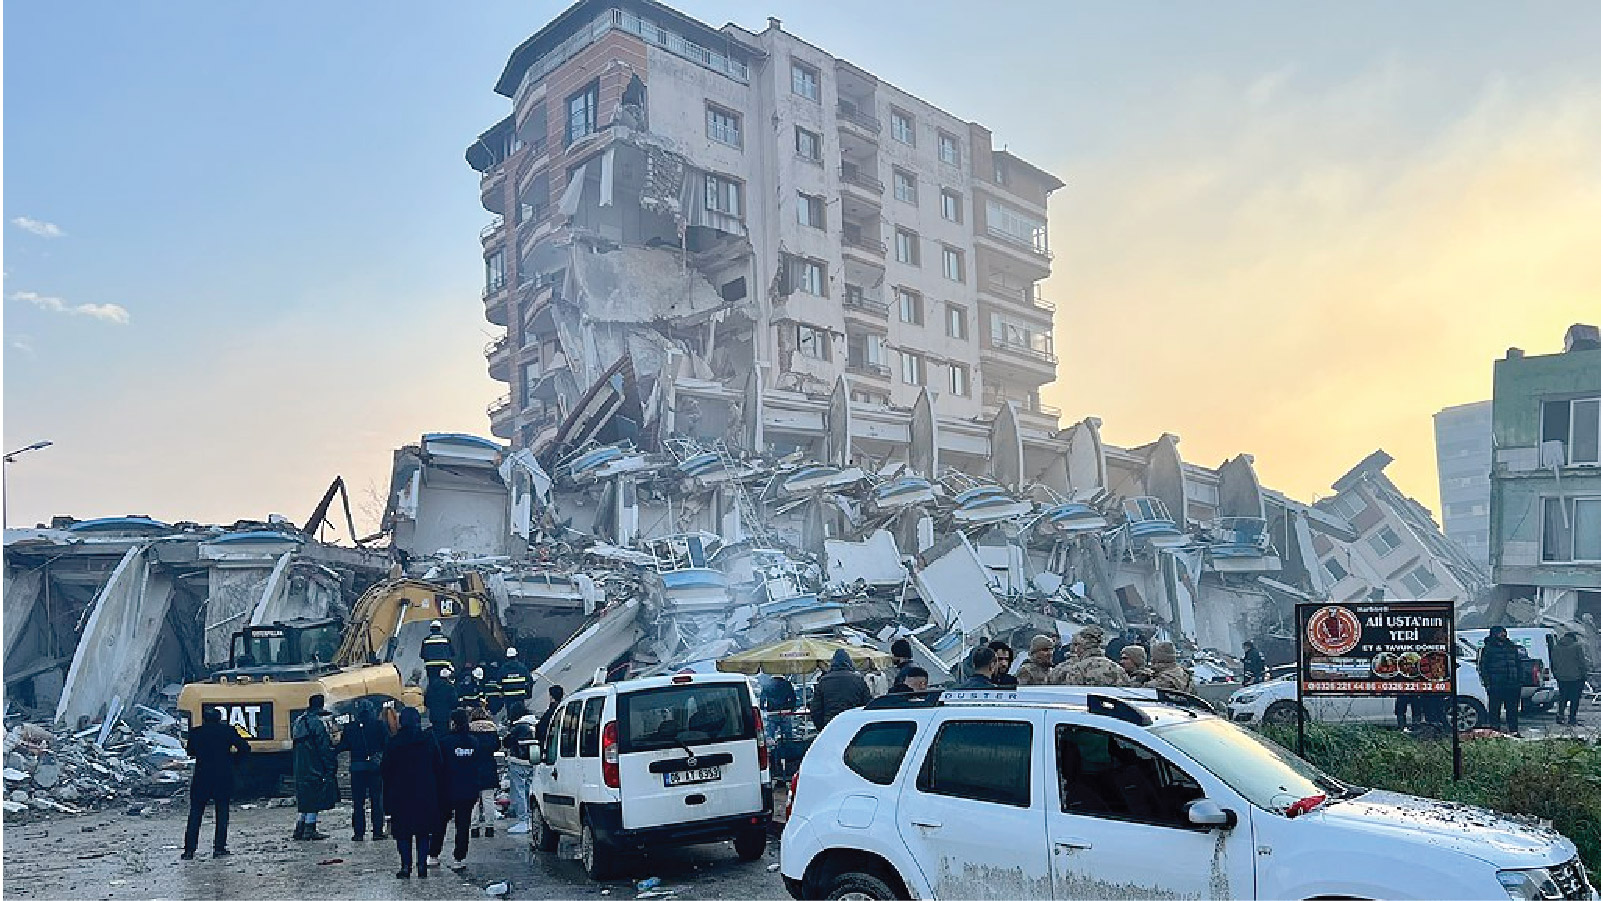 A block of destroyed buildings in the Hatay province of Türkiye shows the earthquake’s significant impact. One building is still standing but has significant damage and looks like it is on the brink of collapse. It is surrounded by rubble of collapsed buildings. An excavator works on the rubble as people observe the scene. Parked vehicles are in the forefront.